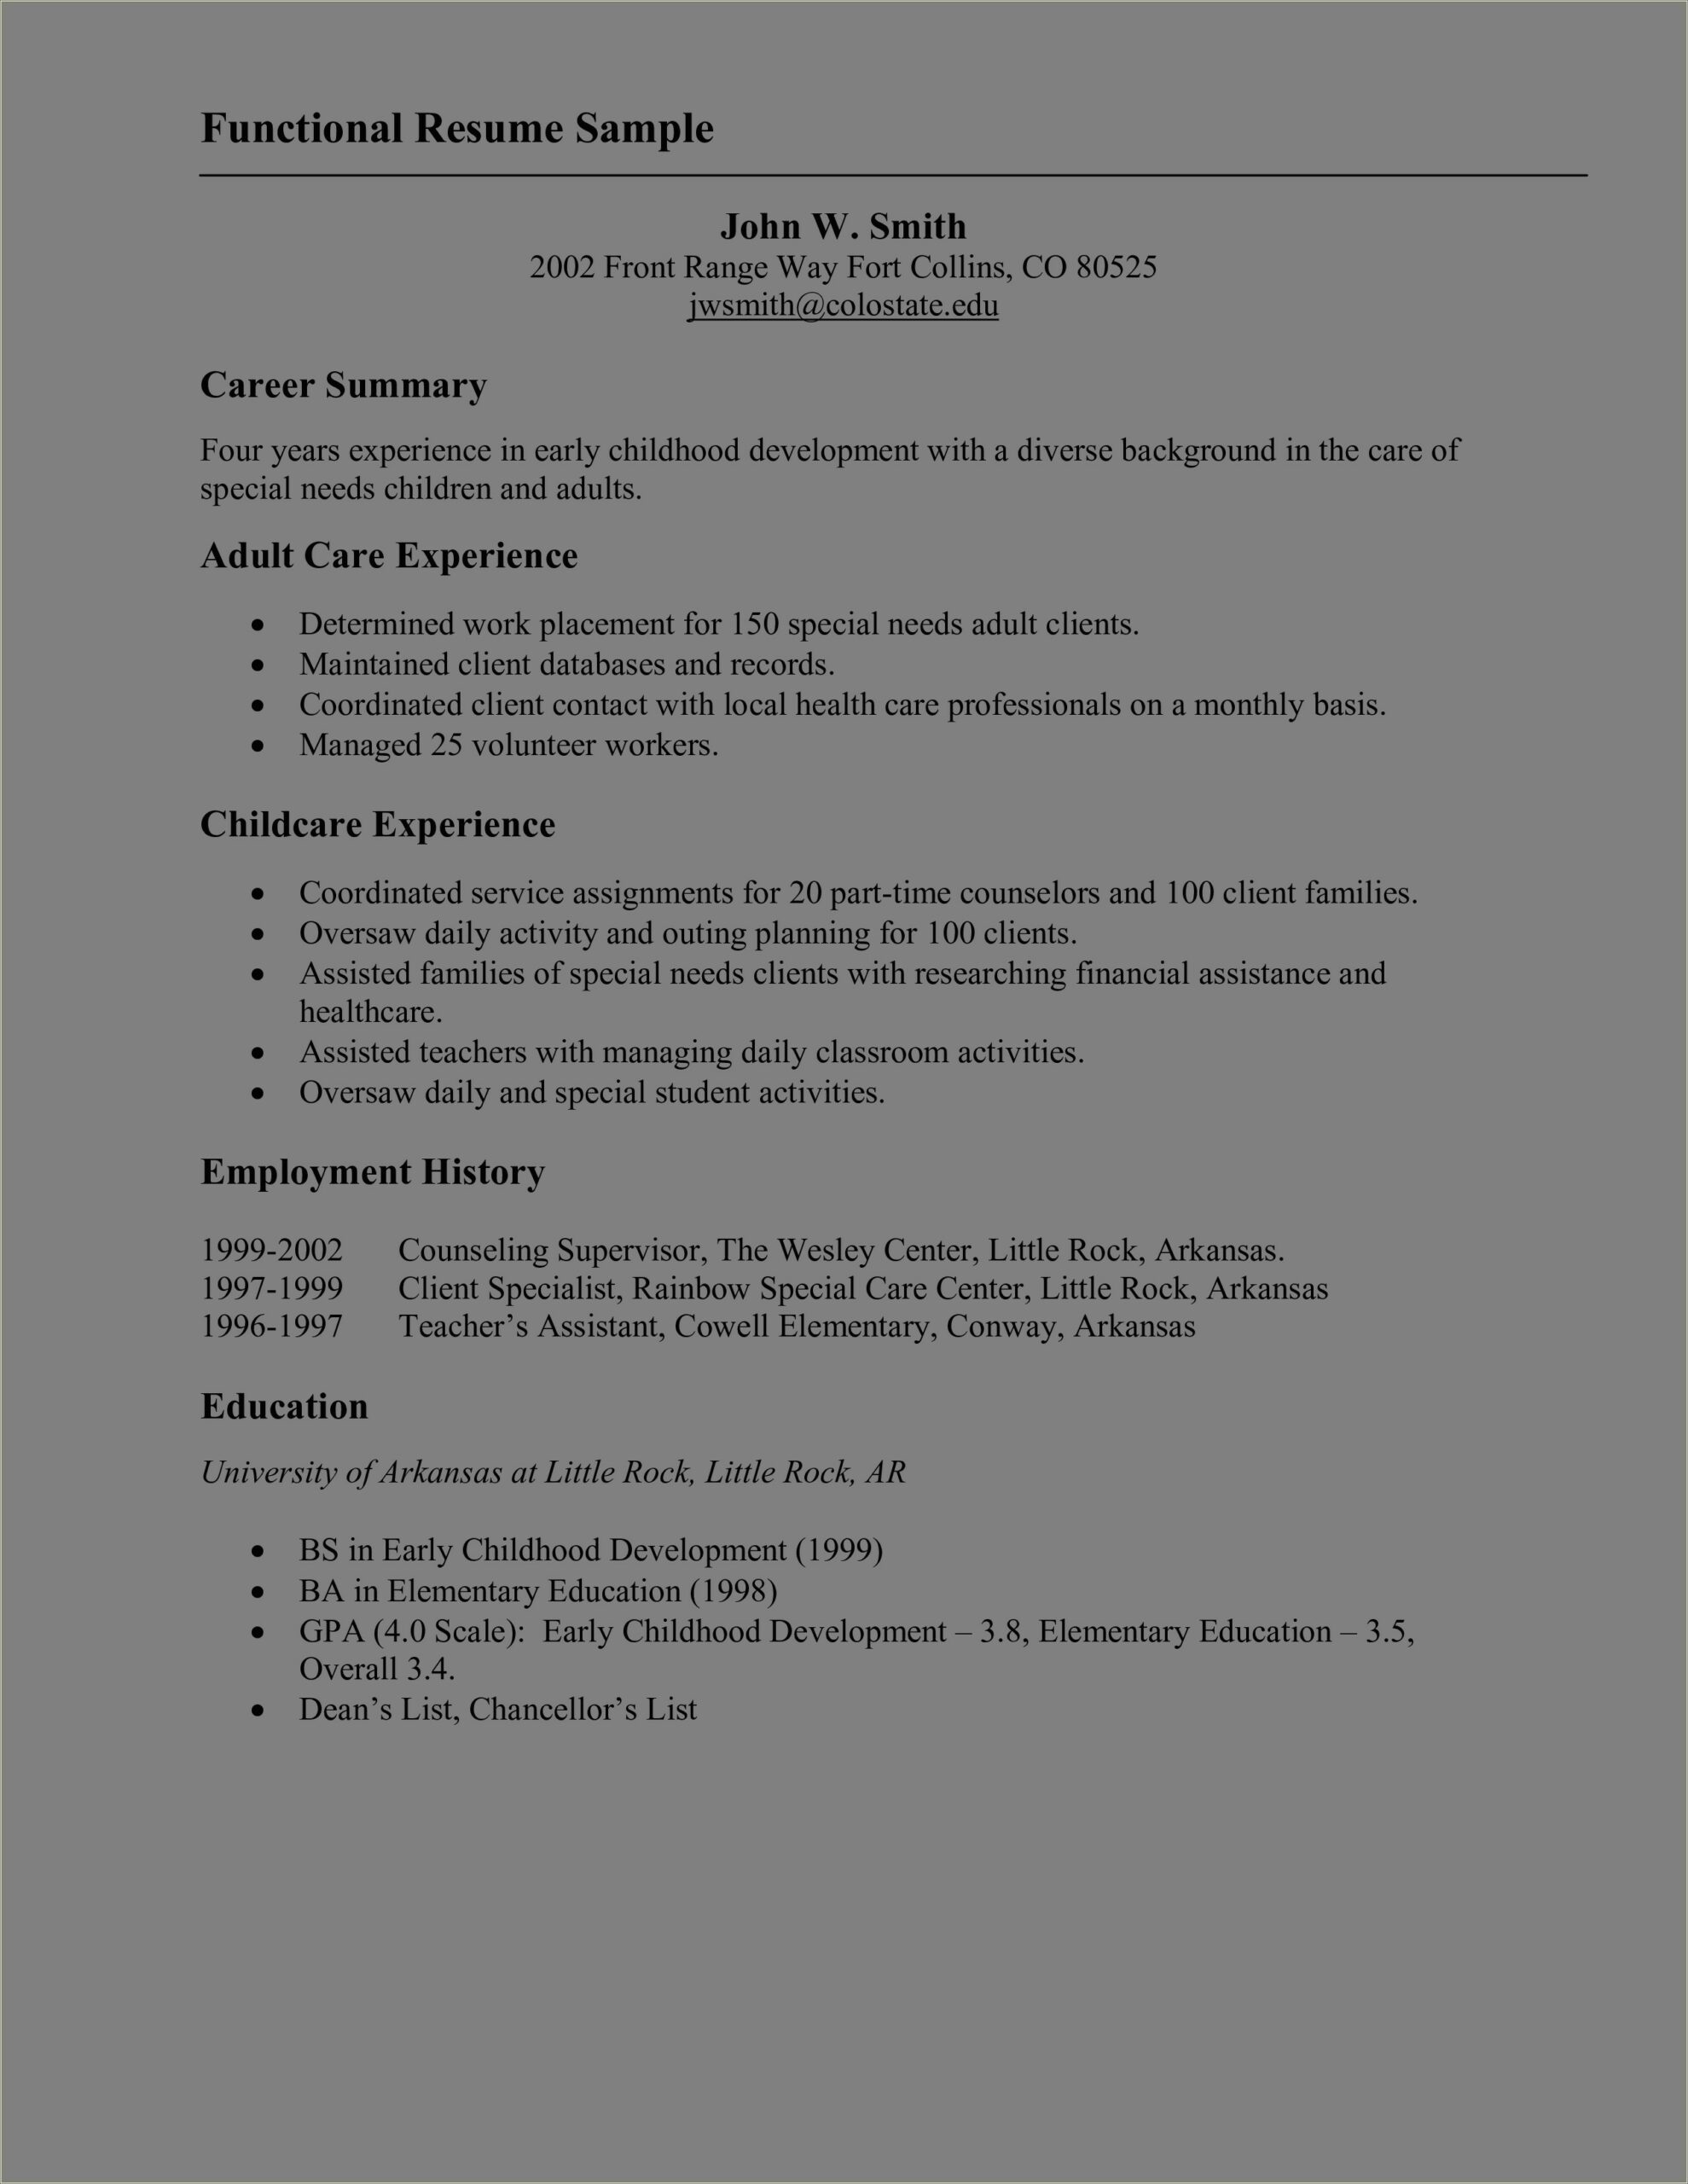 Professional Summary For Early Childhood Resume